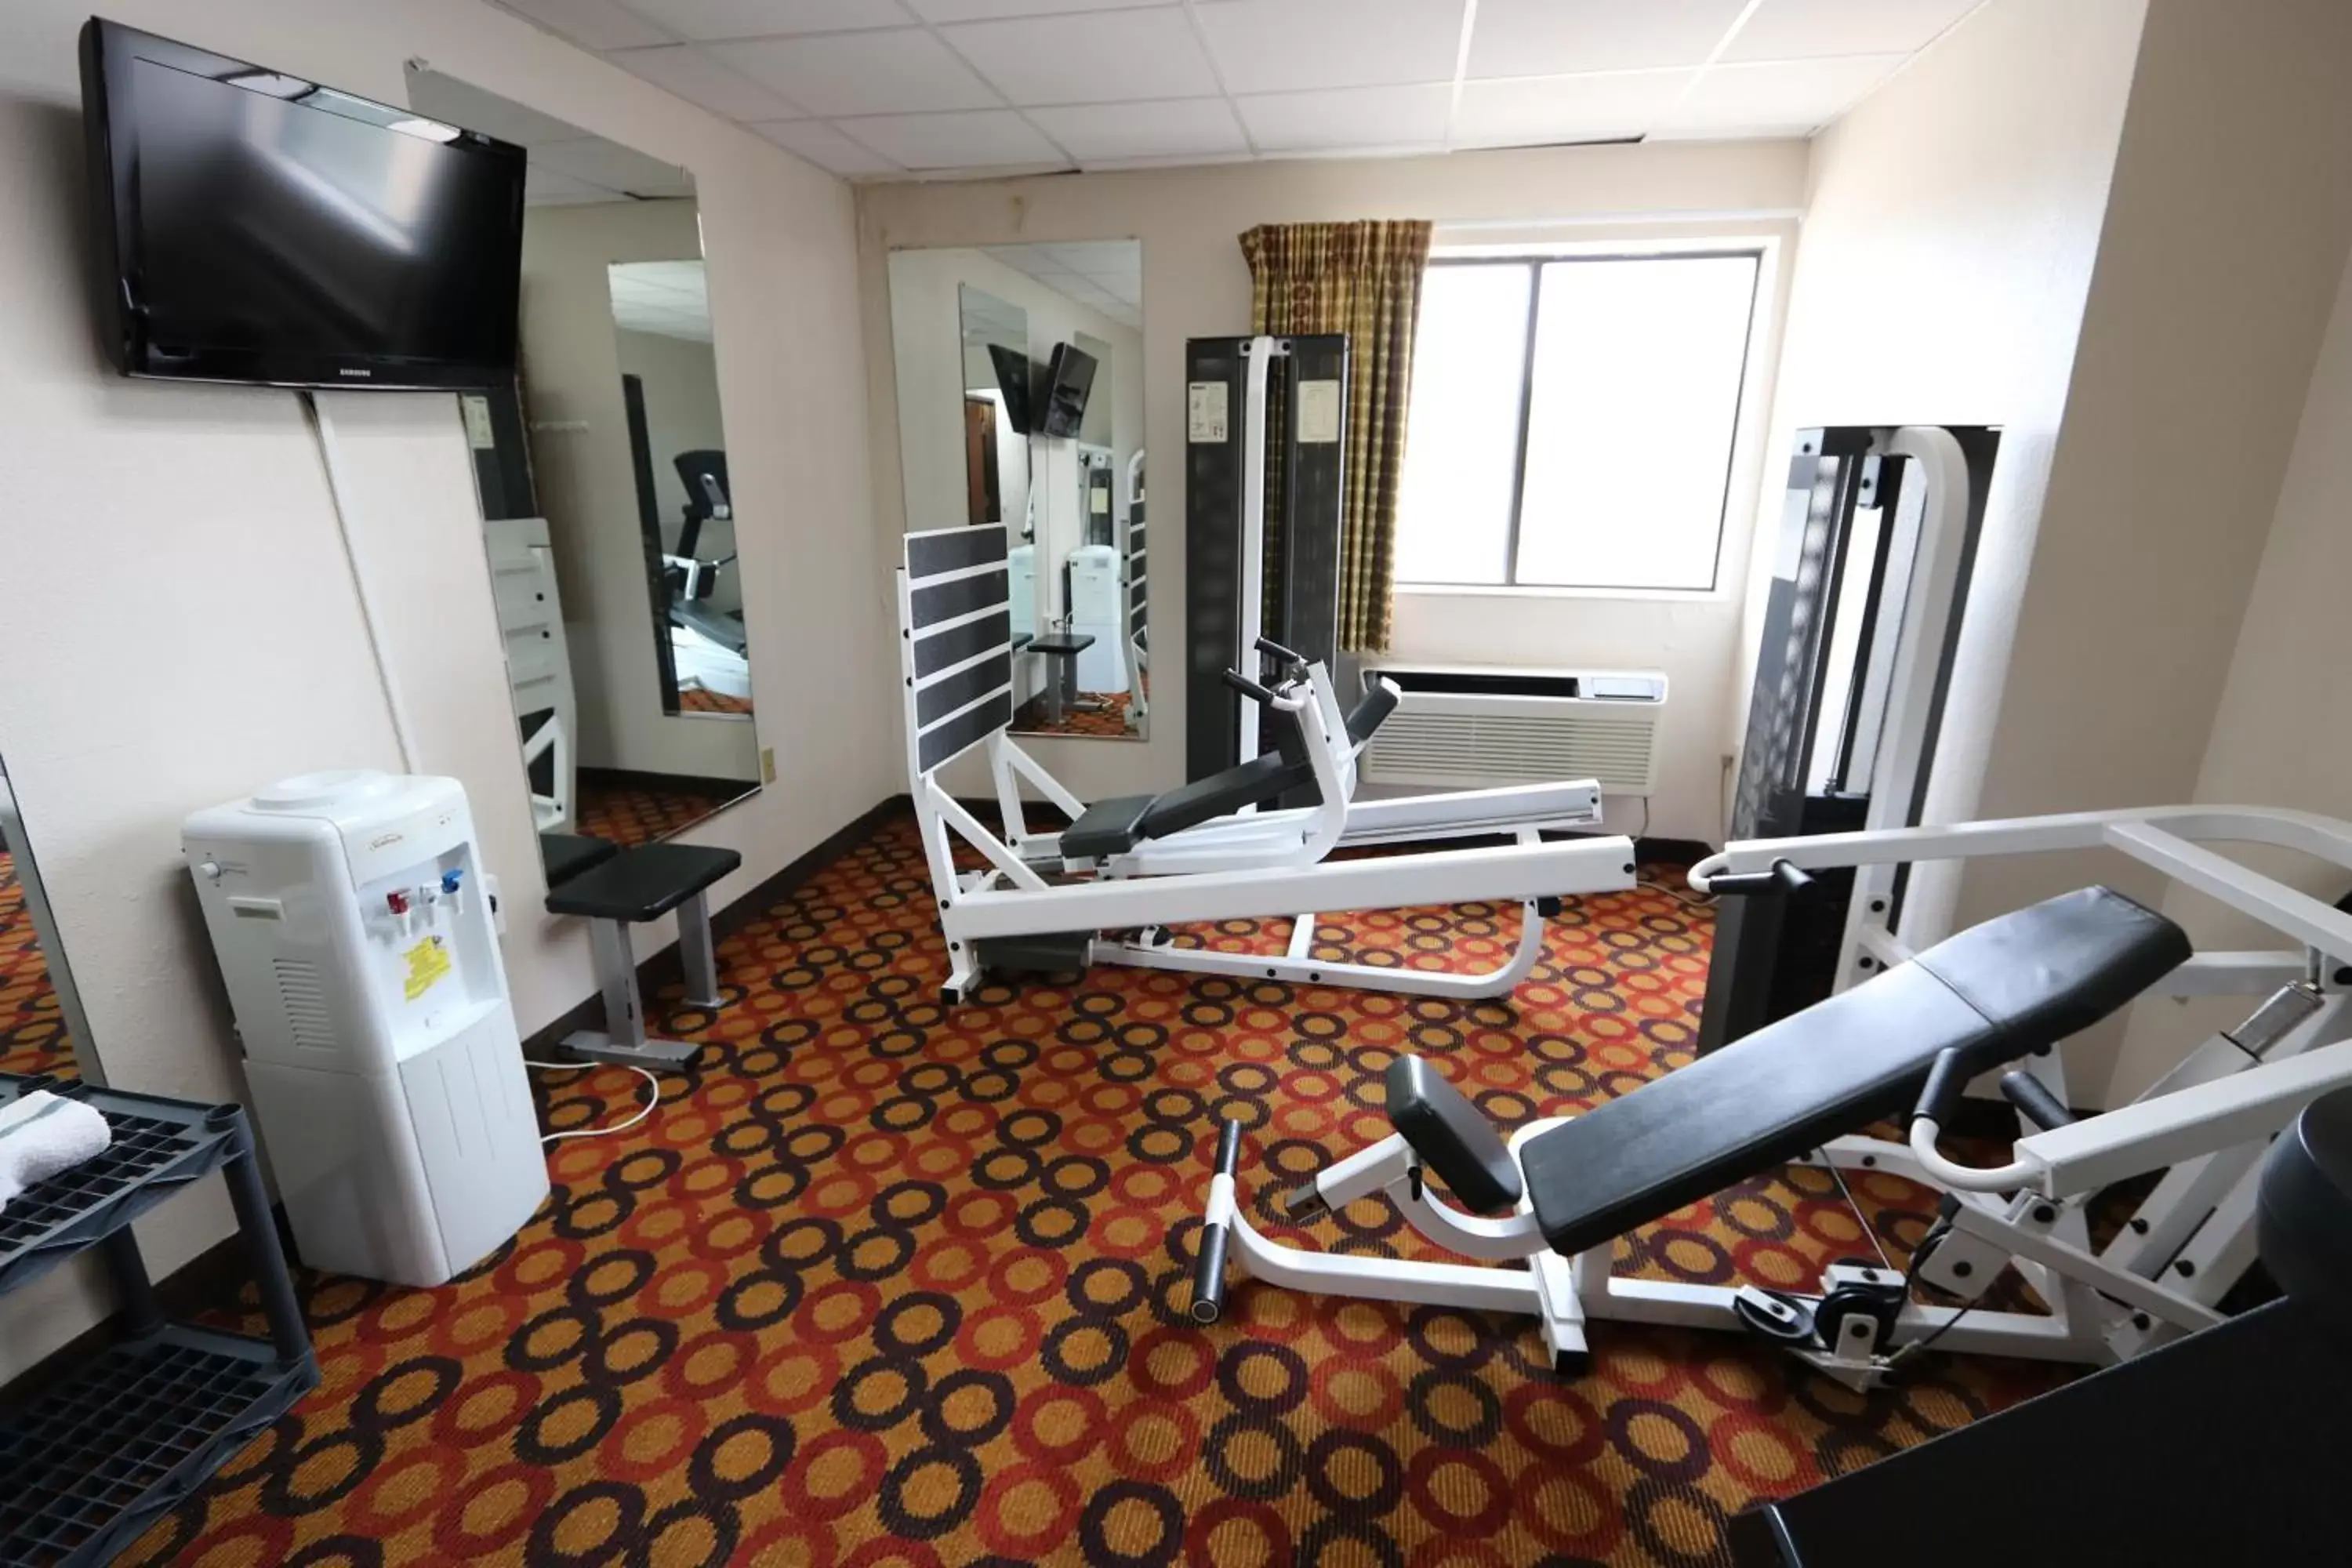 Fitness centre/facilities, Fitness Center/Facilities in Ramada by Wyndham Bolingbrook